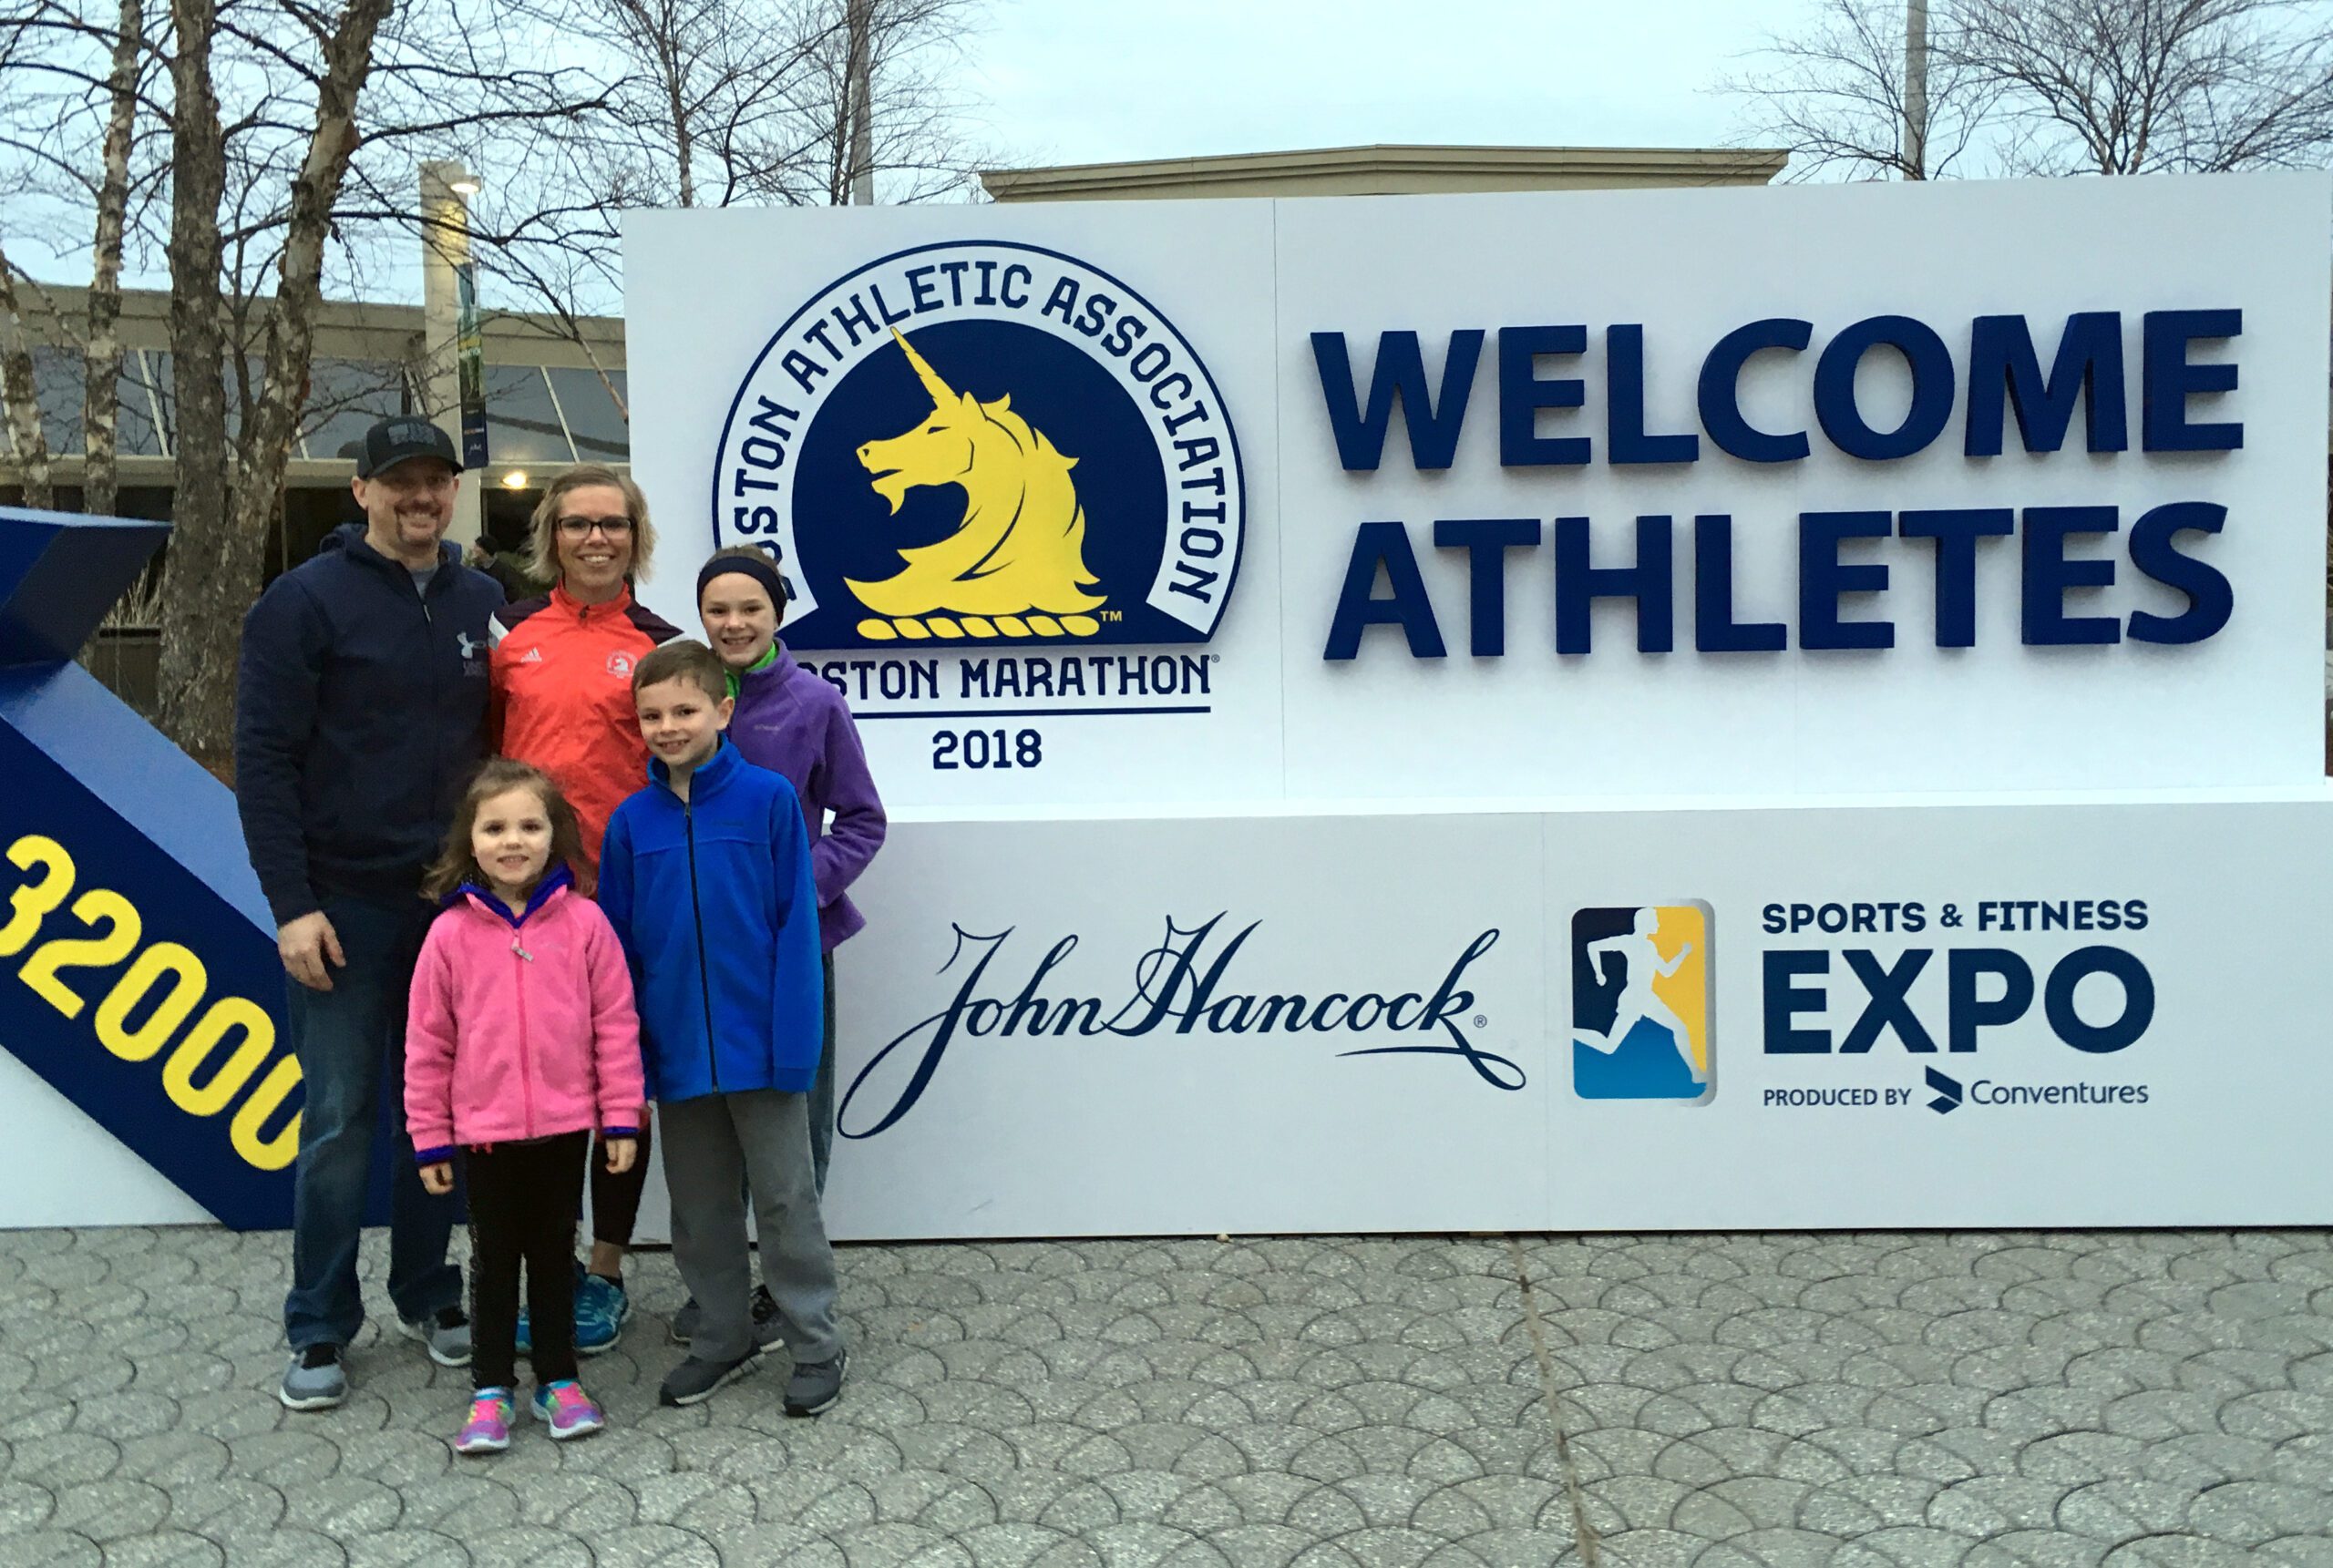 Alison Jones and family pictured at the Welcome Athletes sign in Boston.